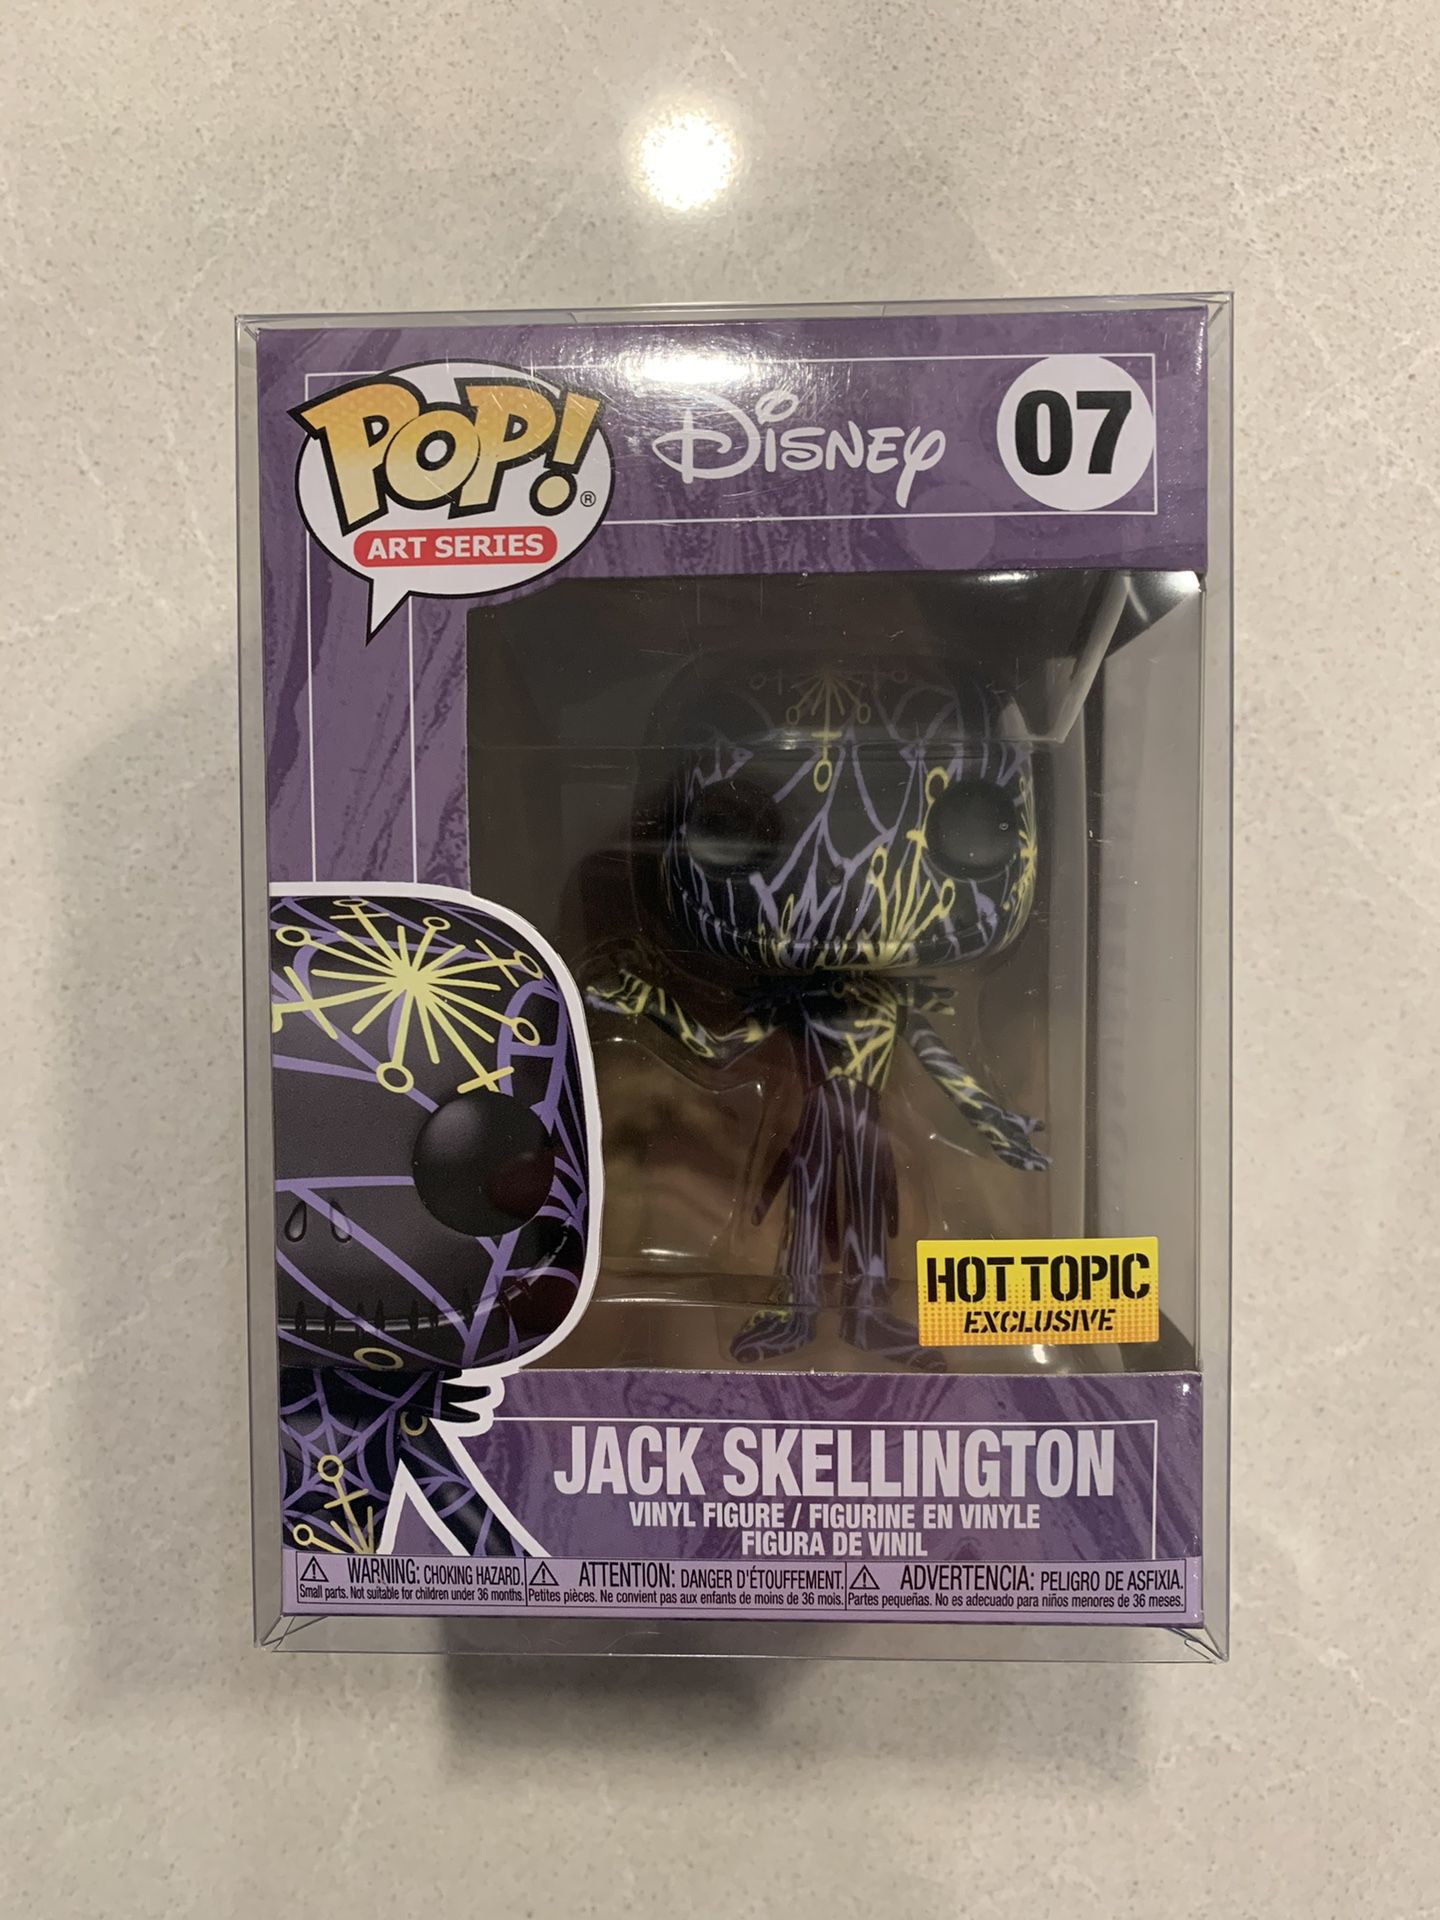 Jack Skellington Art Series Funko Pop *MINT* Hot Topic Exclusive Disney Nightmare Before Christmas NBC 07 with protector